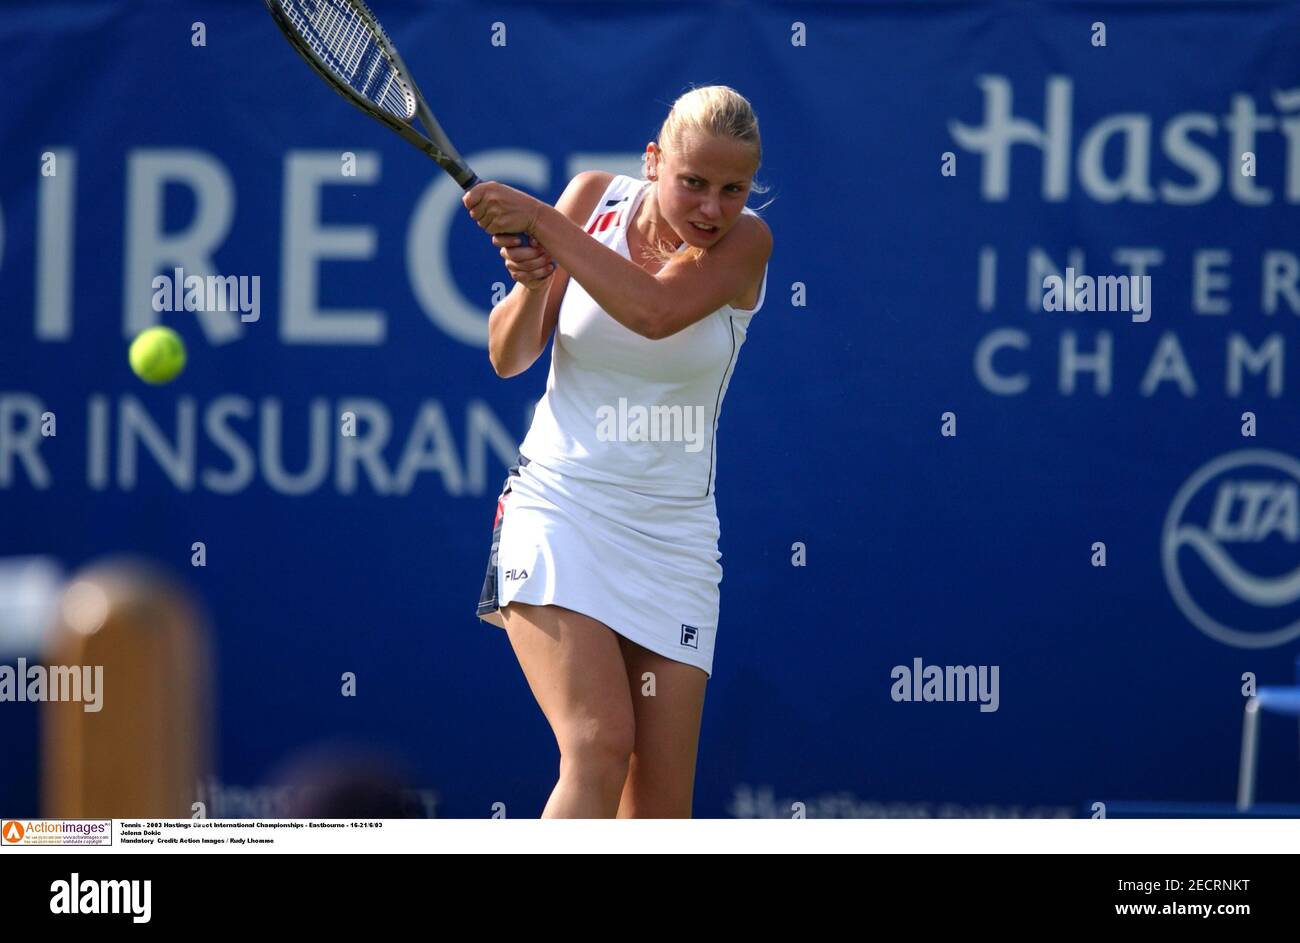 Tennis - 2003 Hastings Direct International Championships - Eastbourne -  16-21/6/03 Jelena Dokic Mandatory Credit: Action Images / Rudy Lhomme Stock  Photo - Alamy